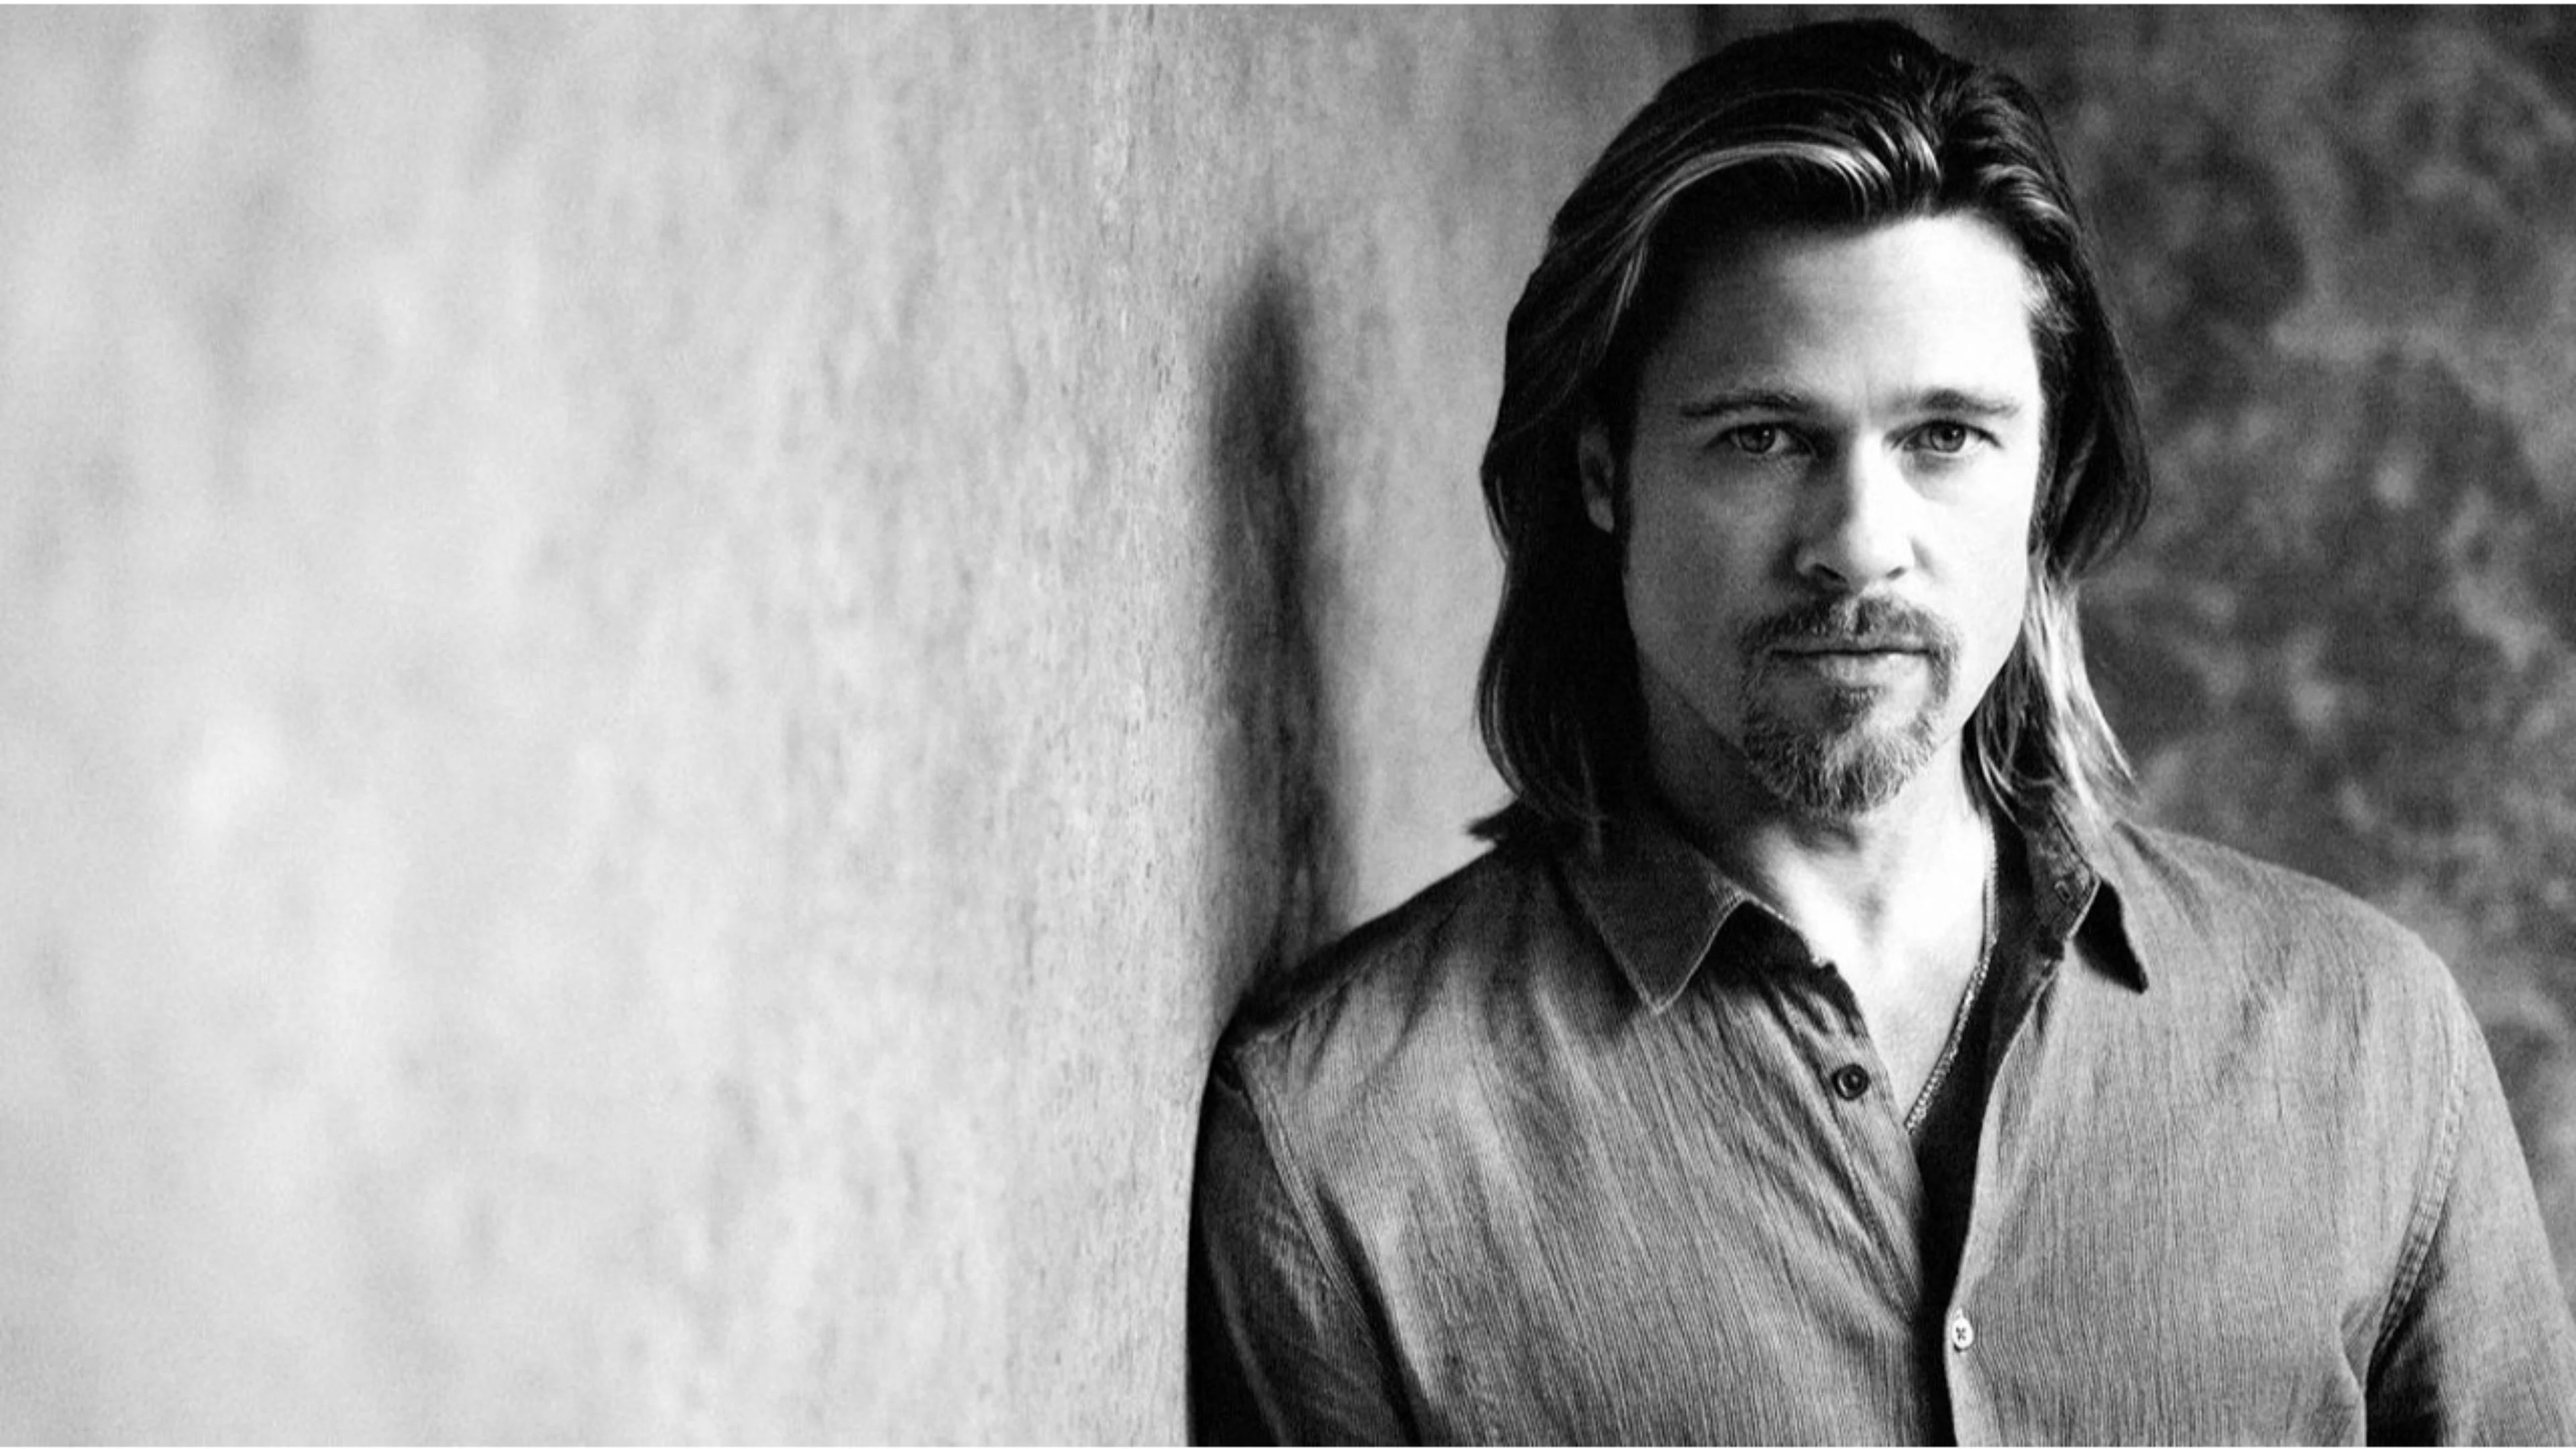 Brad Pitt: American actor and film producer, The recipient of various accolades. 3840x2160 4K Wallpaper.